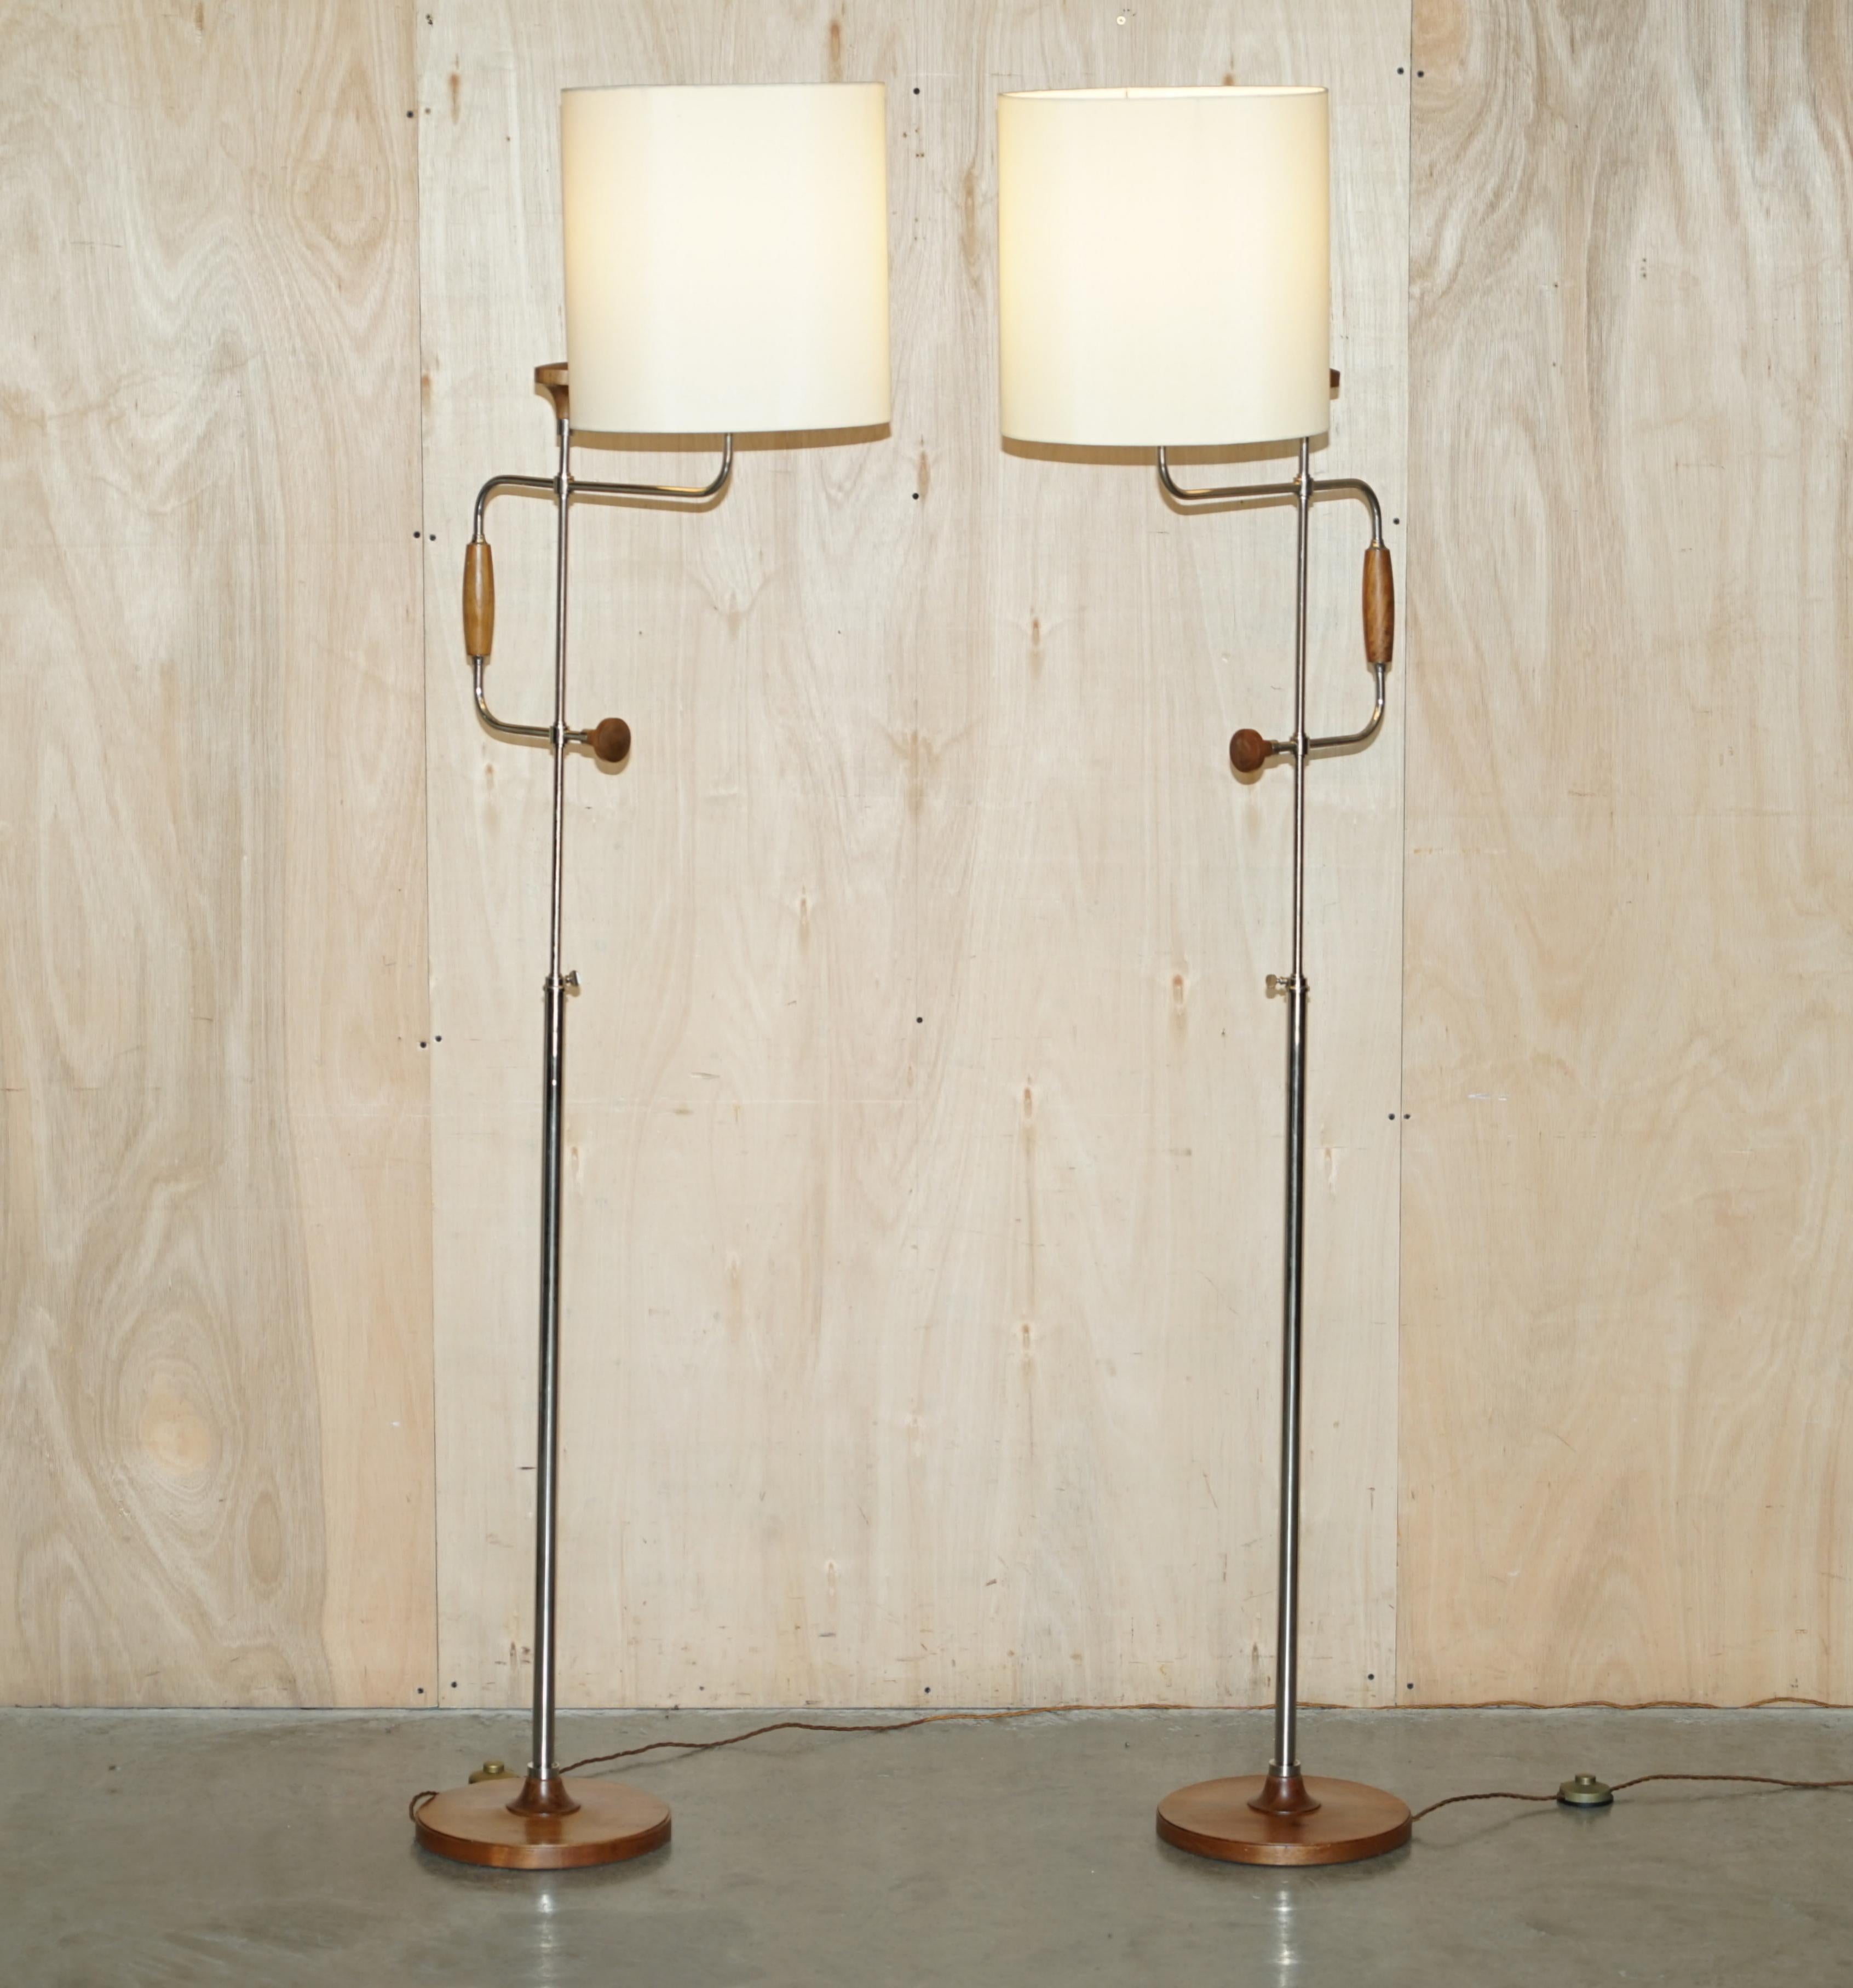 wooden floor lamps with evening delivery within m25